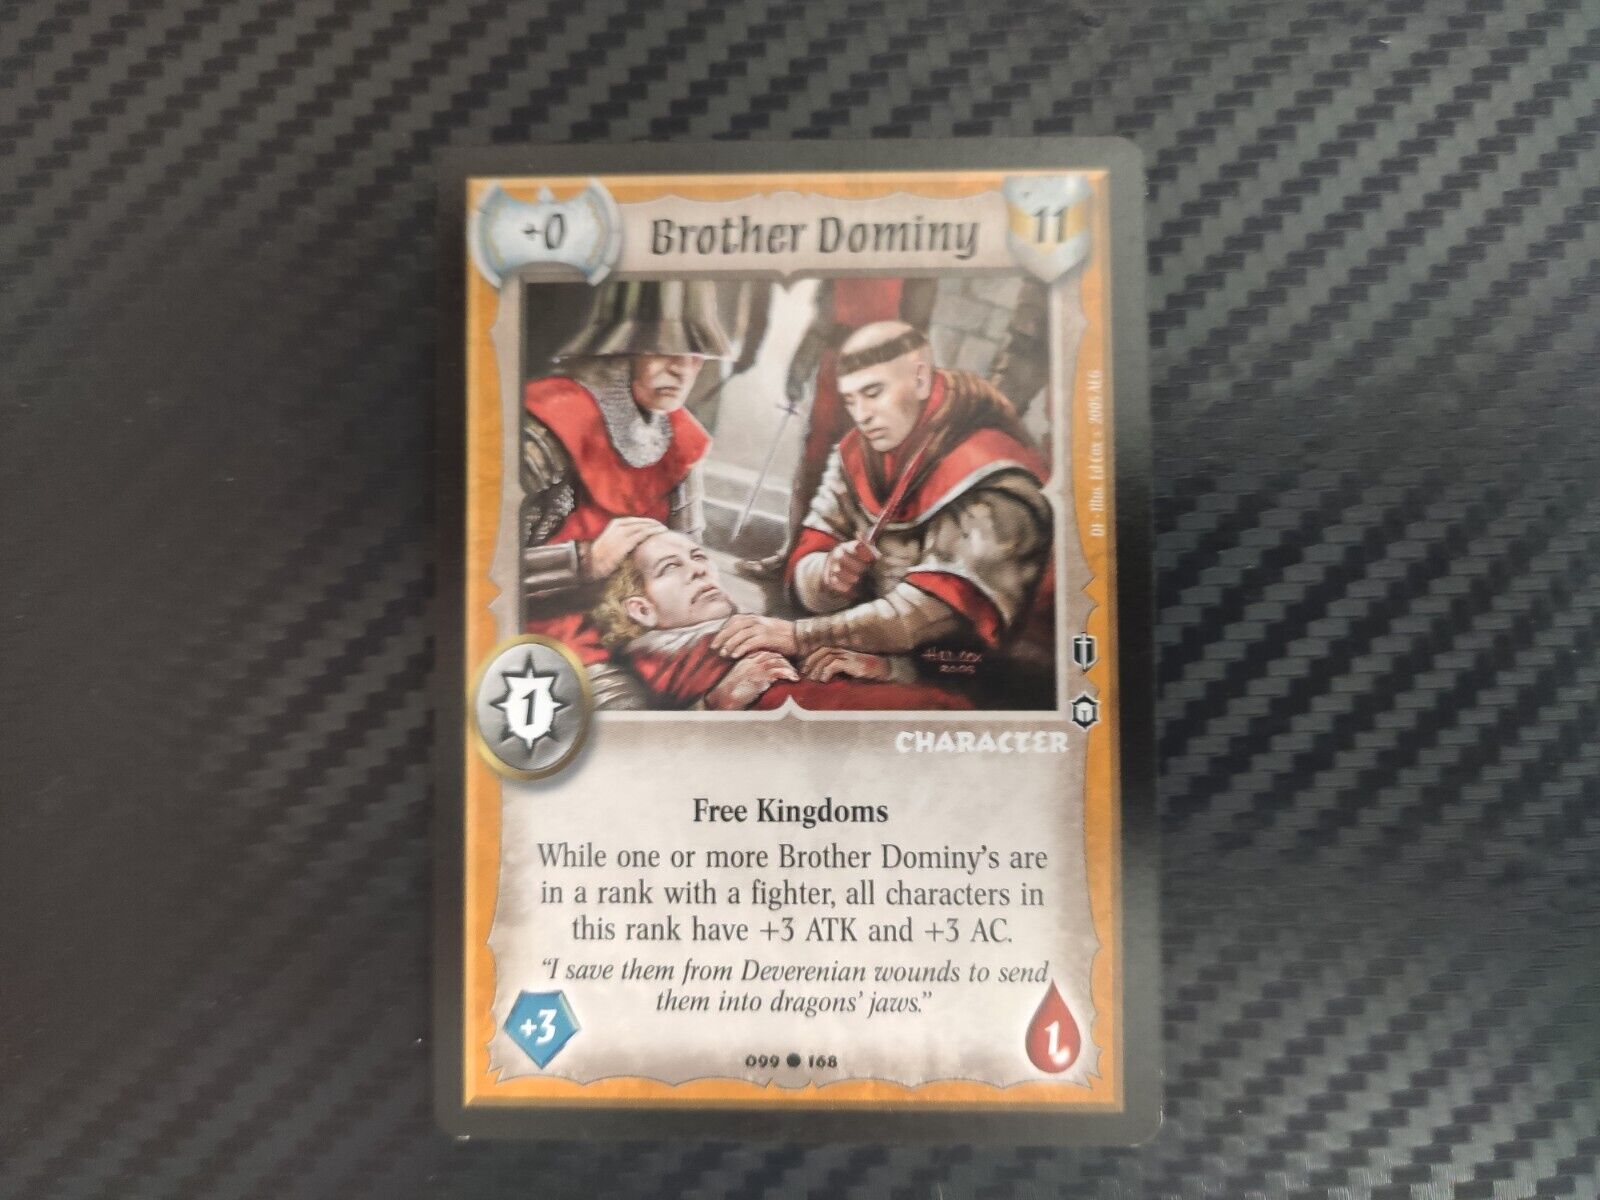 Warlord ccg Free Kingdoms Character Brother Dominy x1